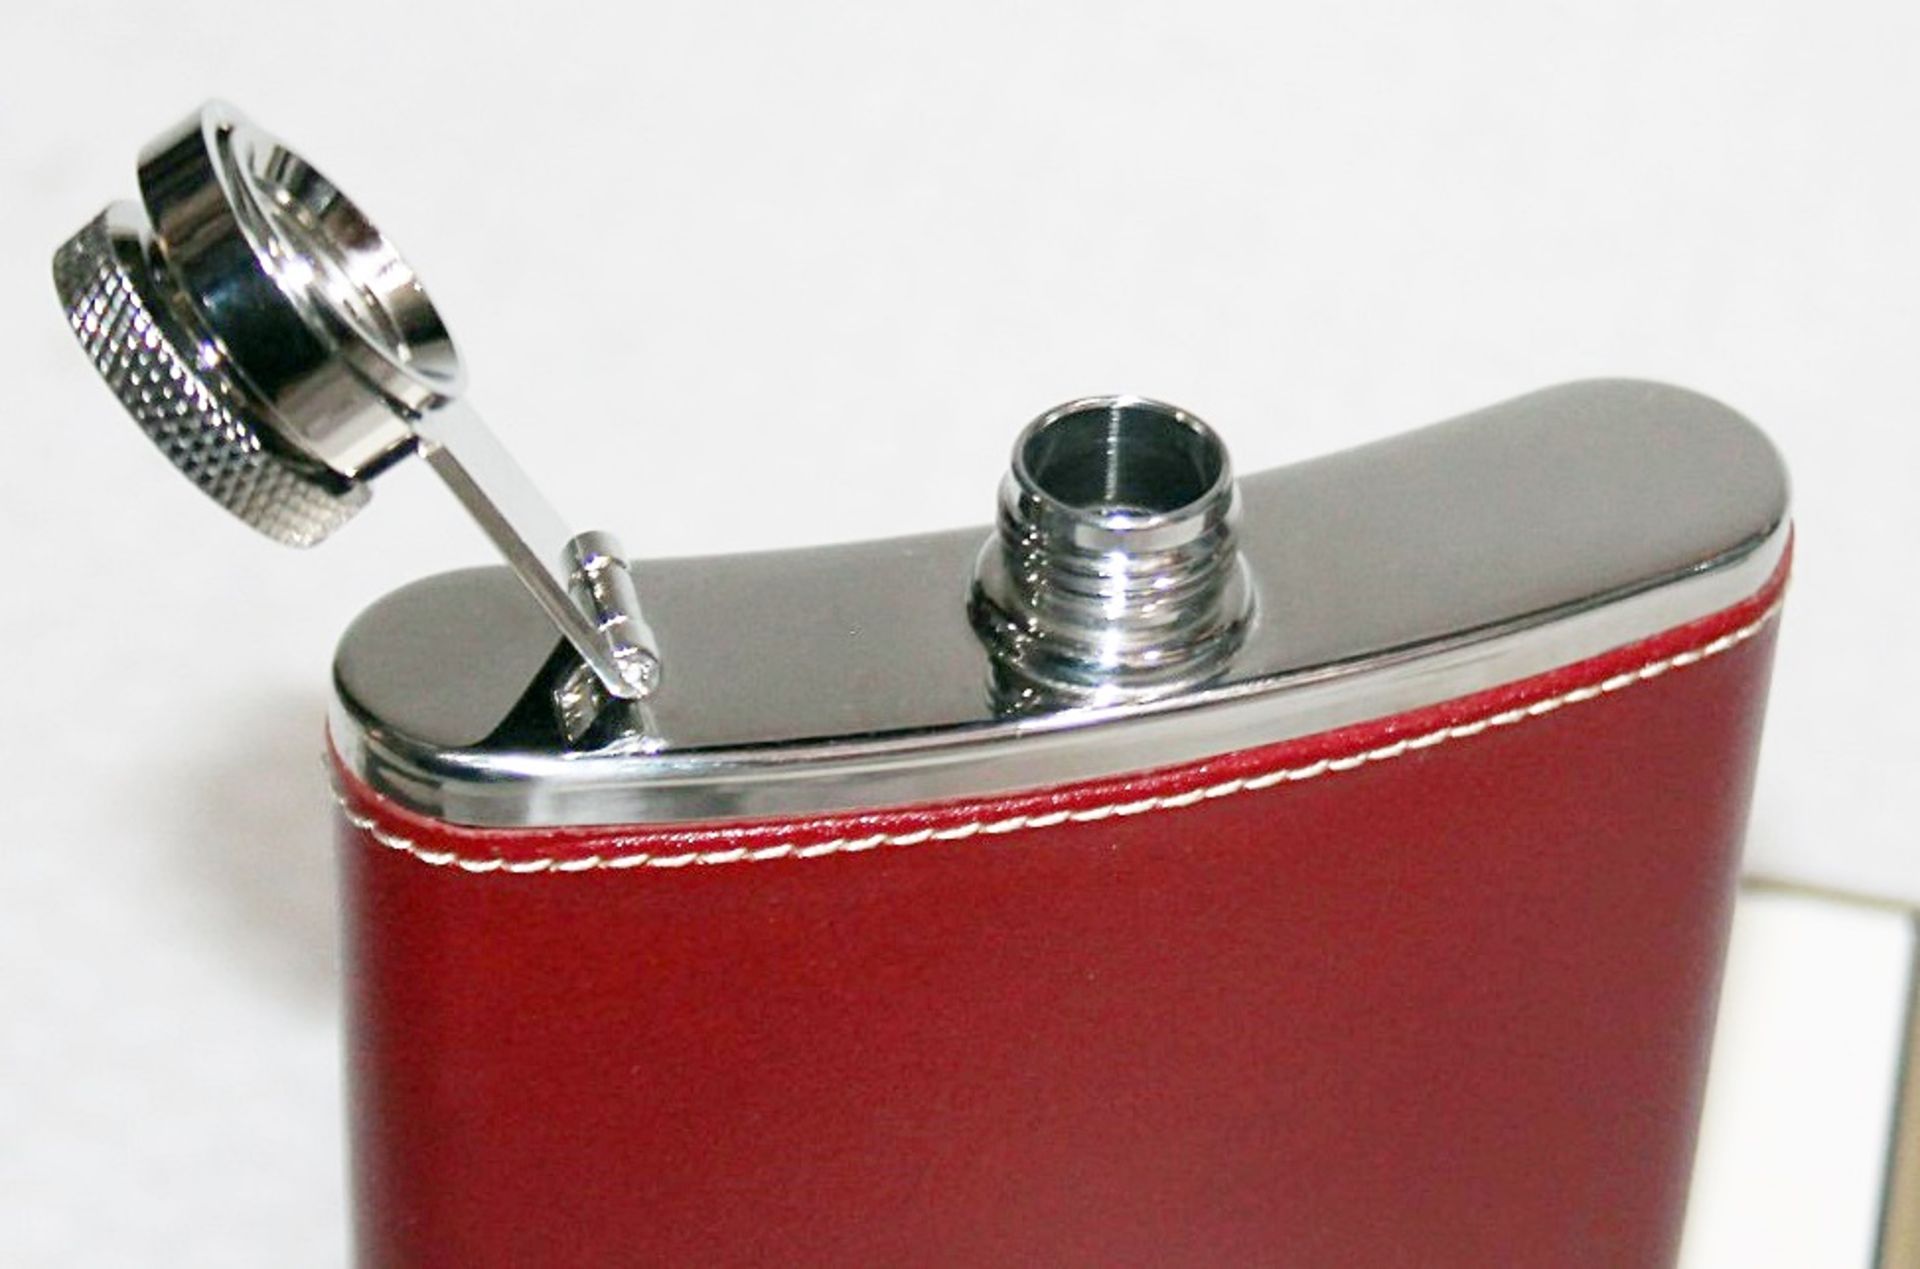 1 x ASPINAL OF LONDON Classic 5oz Fine Red Leather Hip Flask - Original Price £49.00 - Boxed Stock - Image 3 of 8